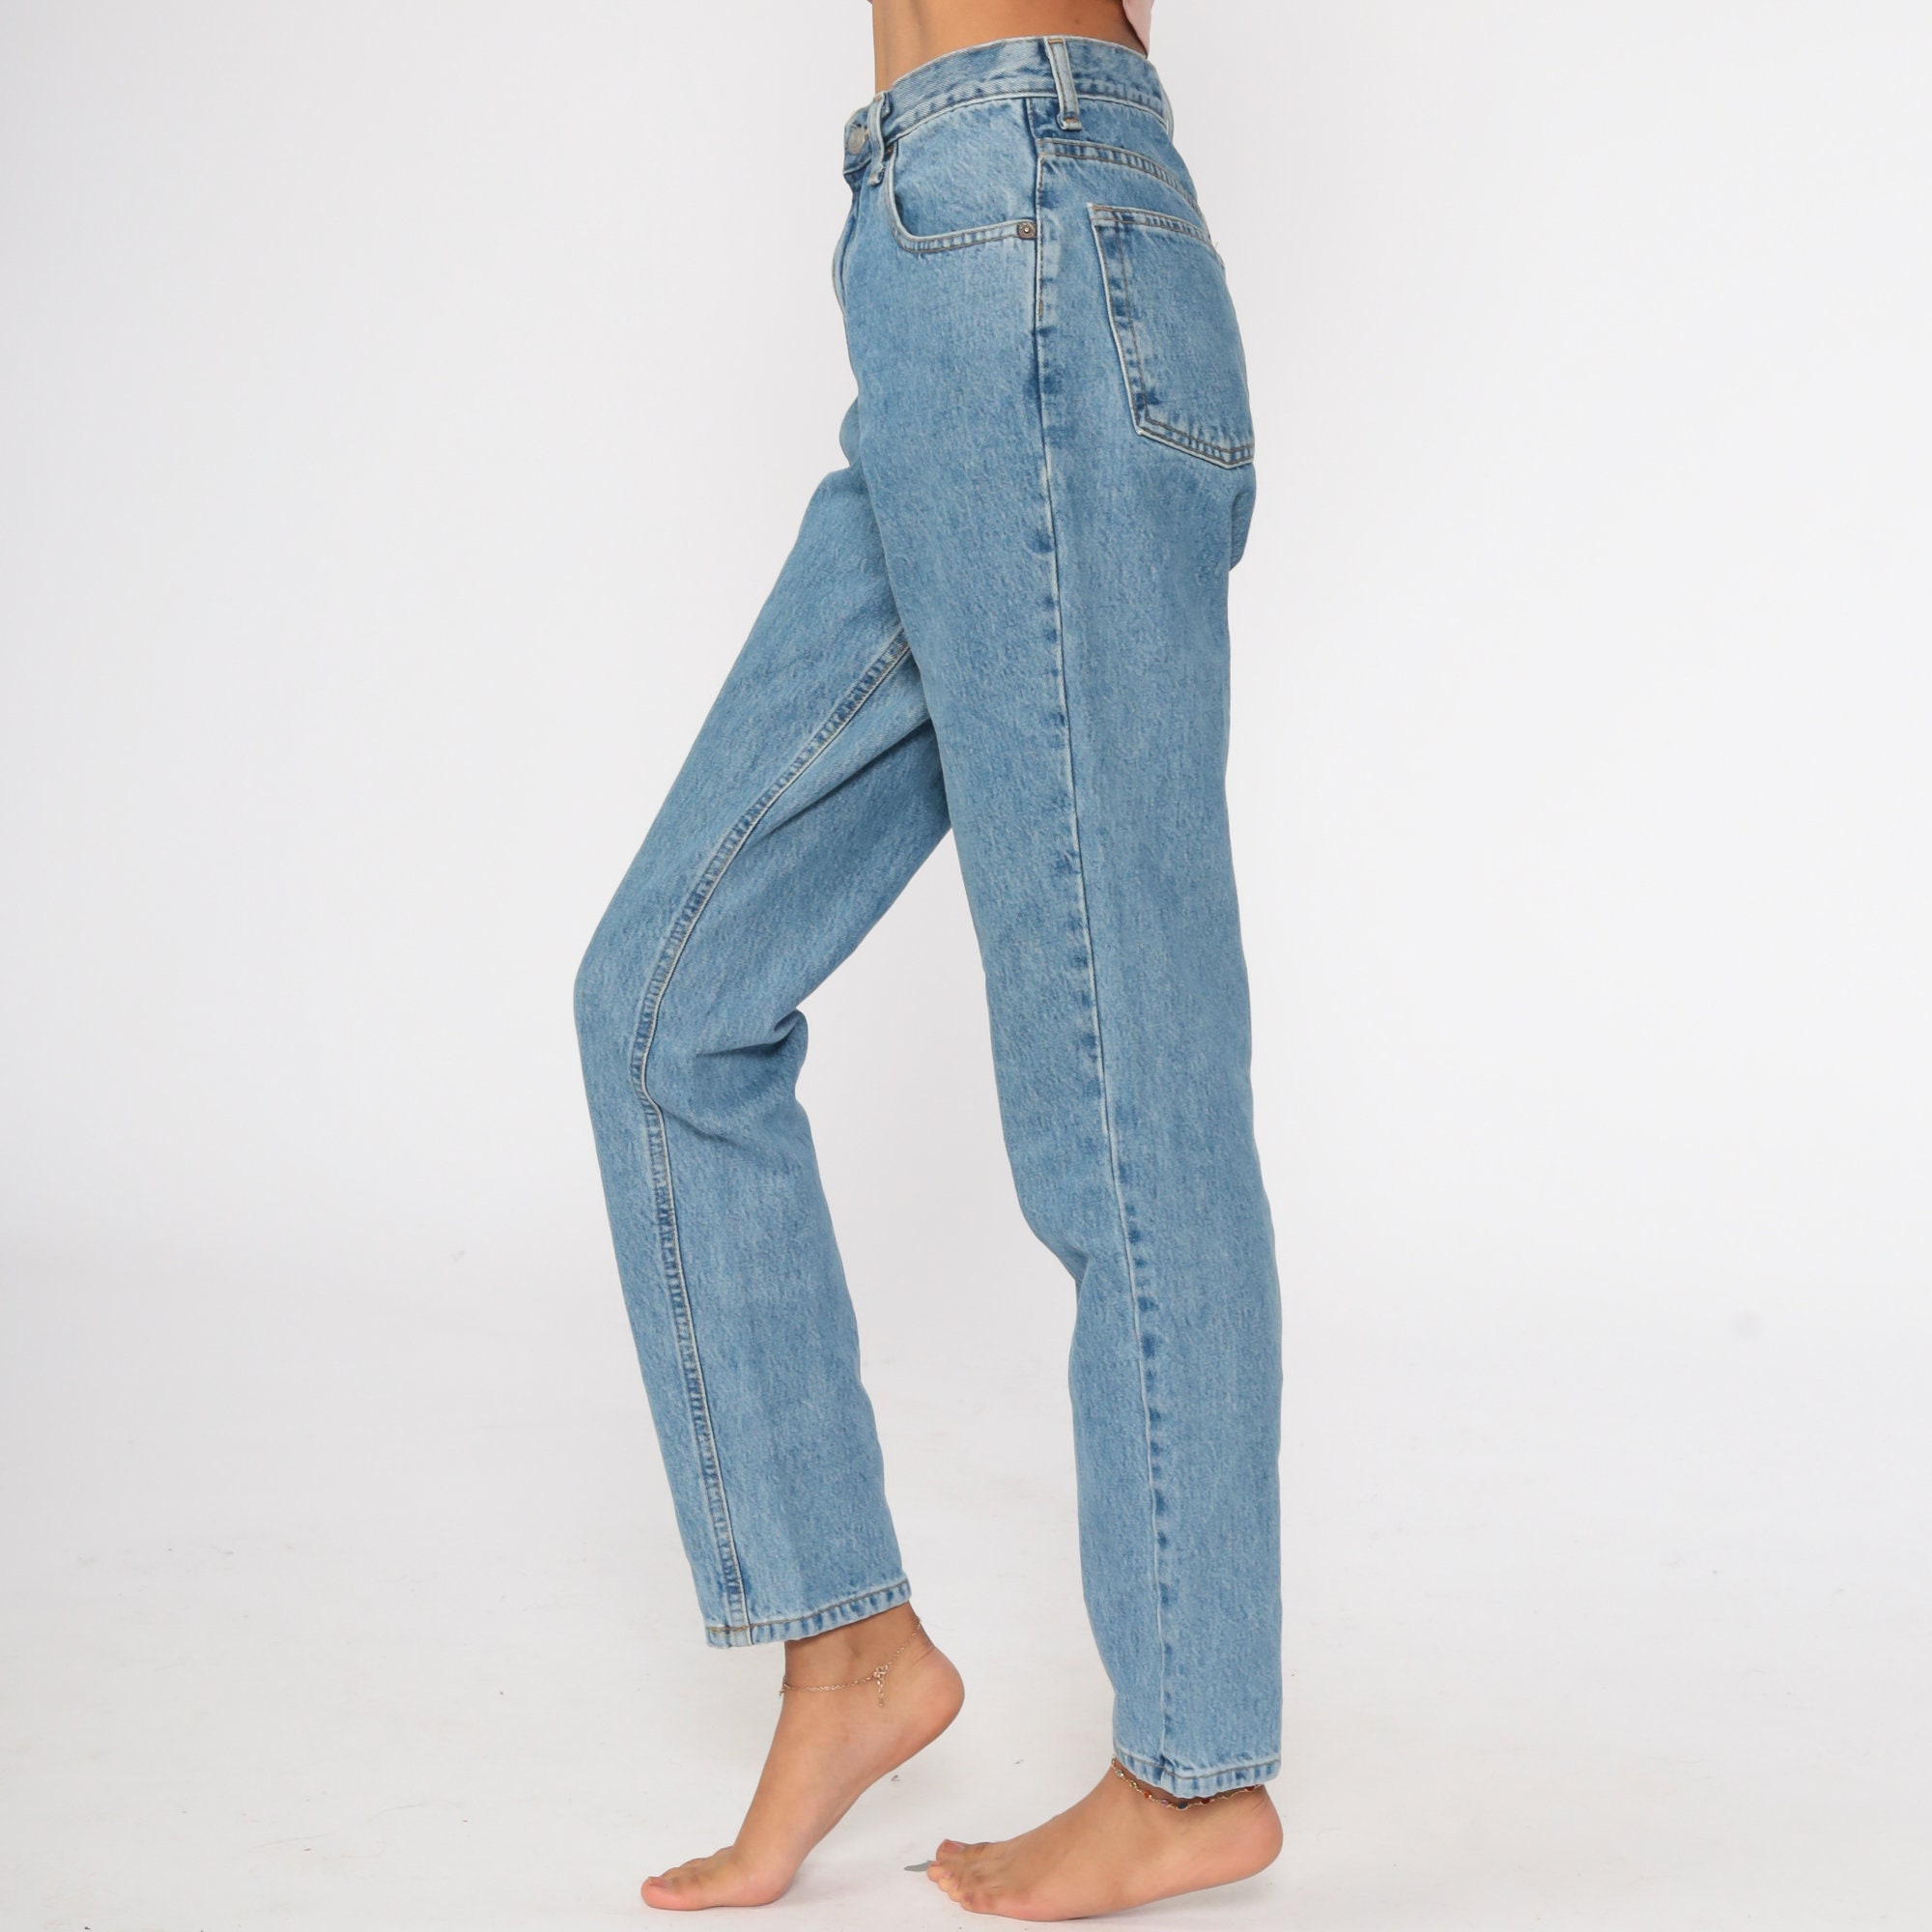 Gap Jeans Mom Jeans Denim Pants High Waist Jeans 90s Jeans Tapered The ...